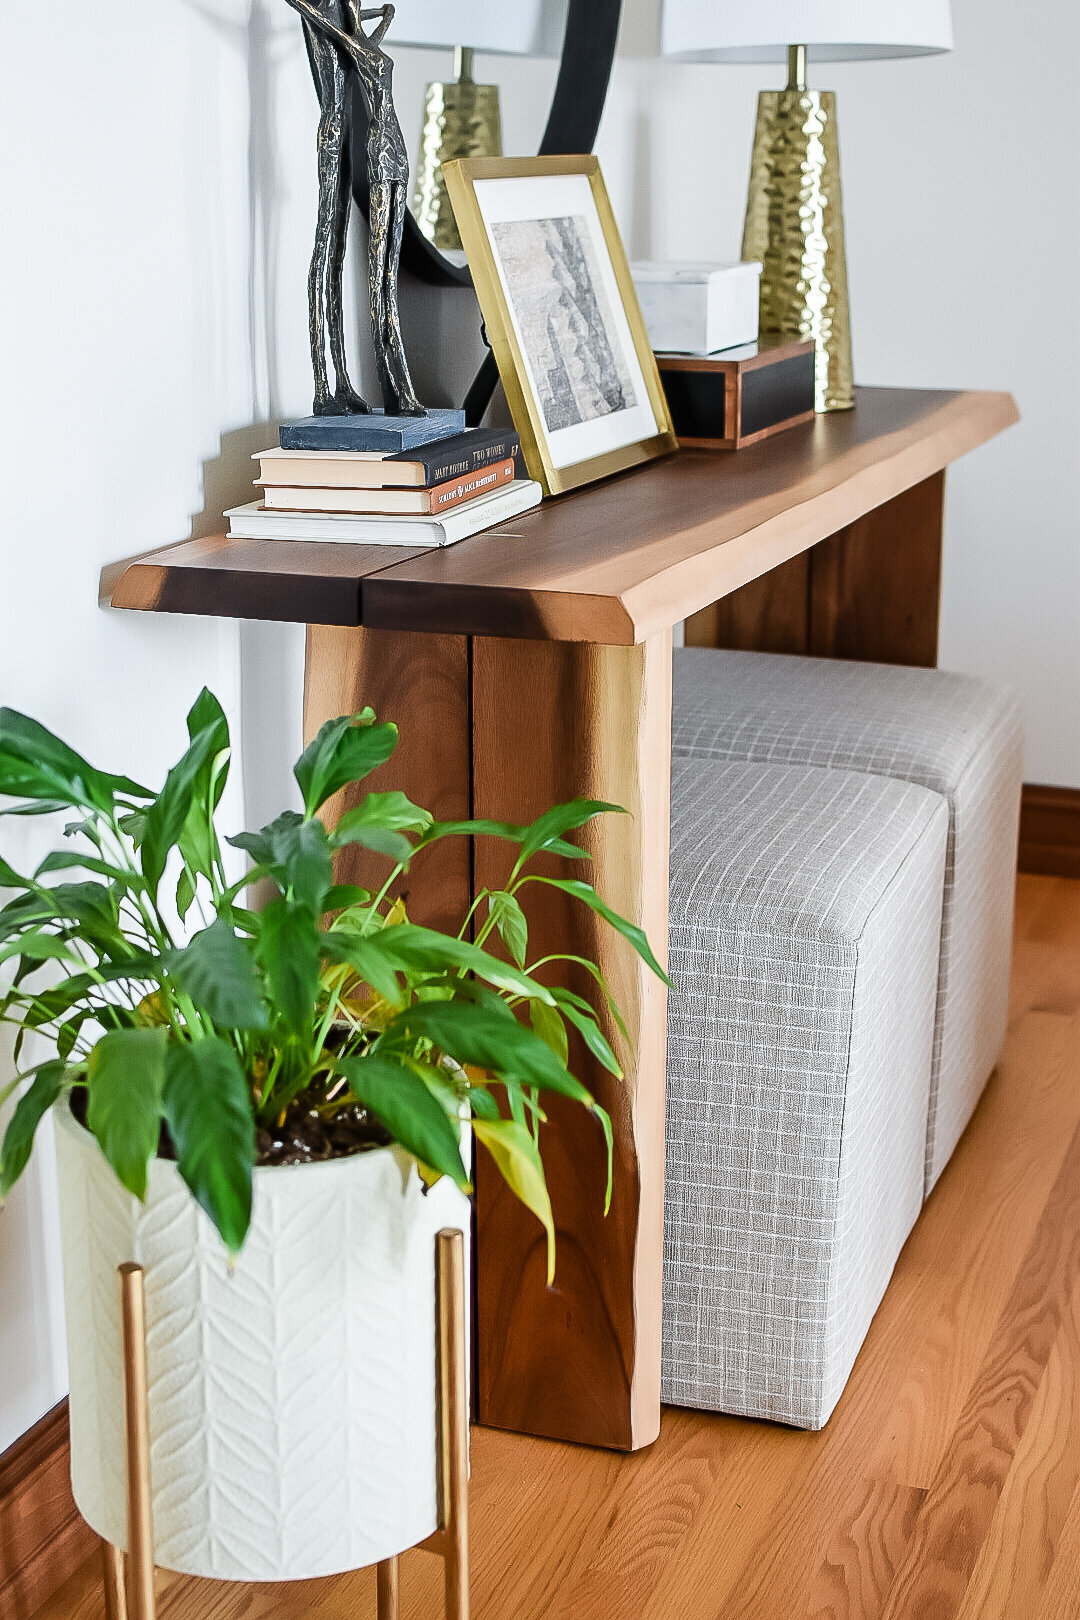 A small living room console table sits in the corner